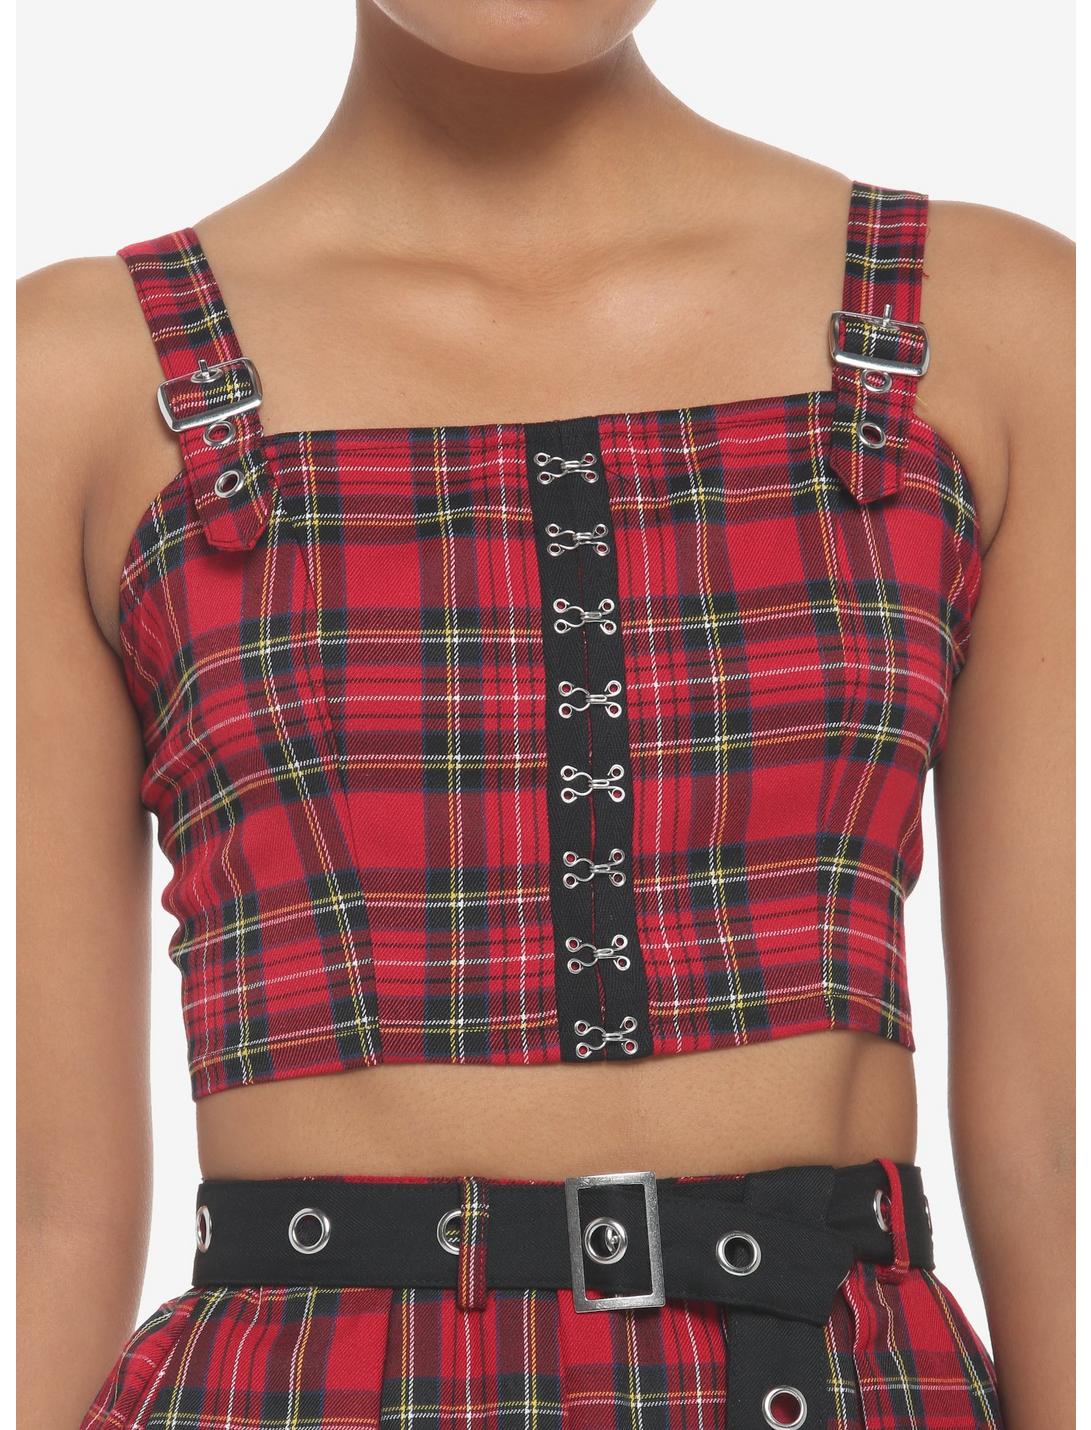 Red Plaid Buckle Strap Girls Crop Tank Top, RED, hi-res